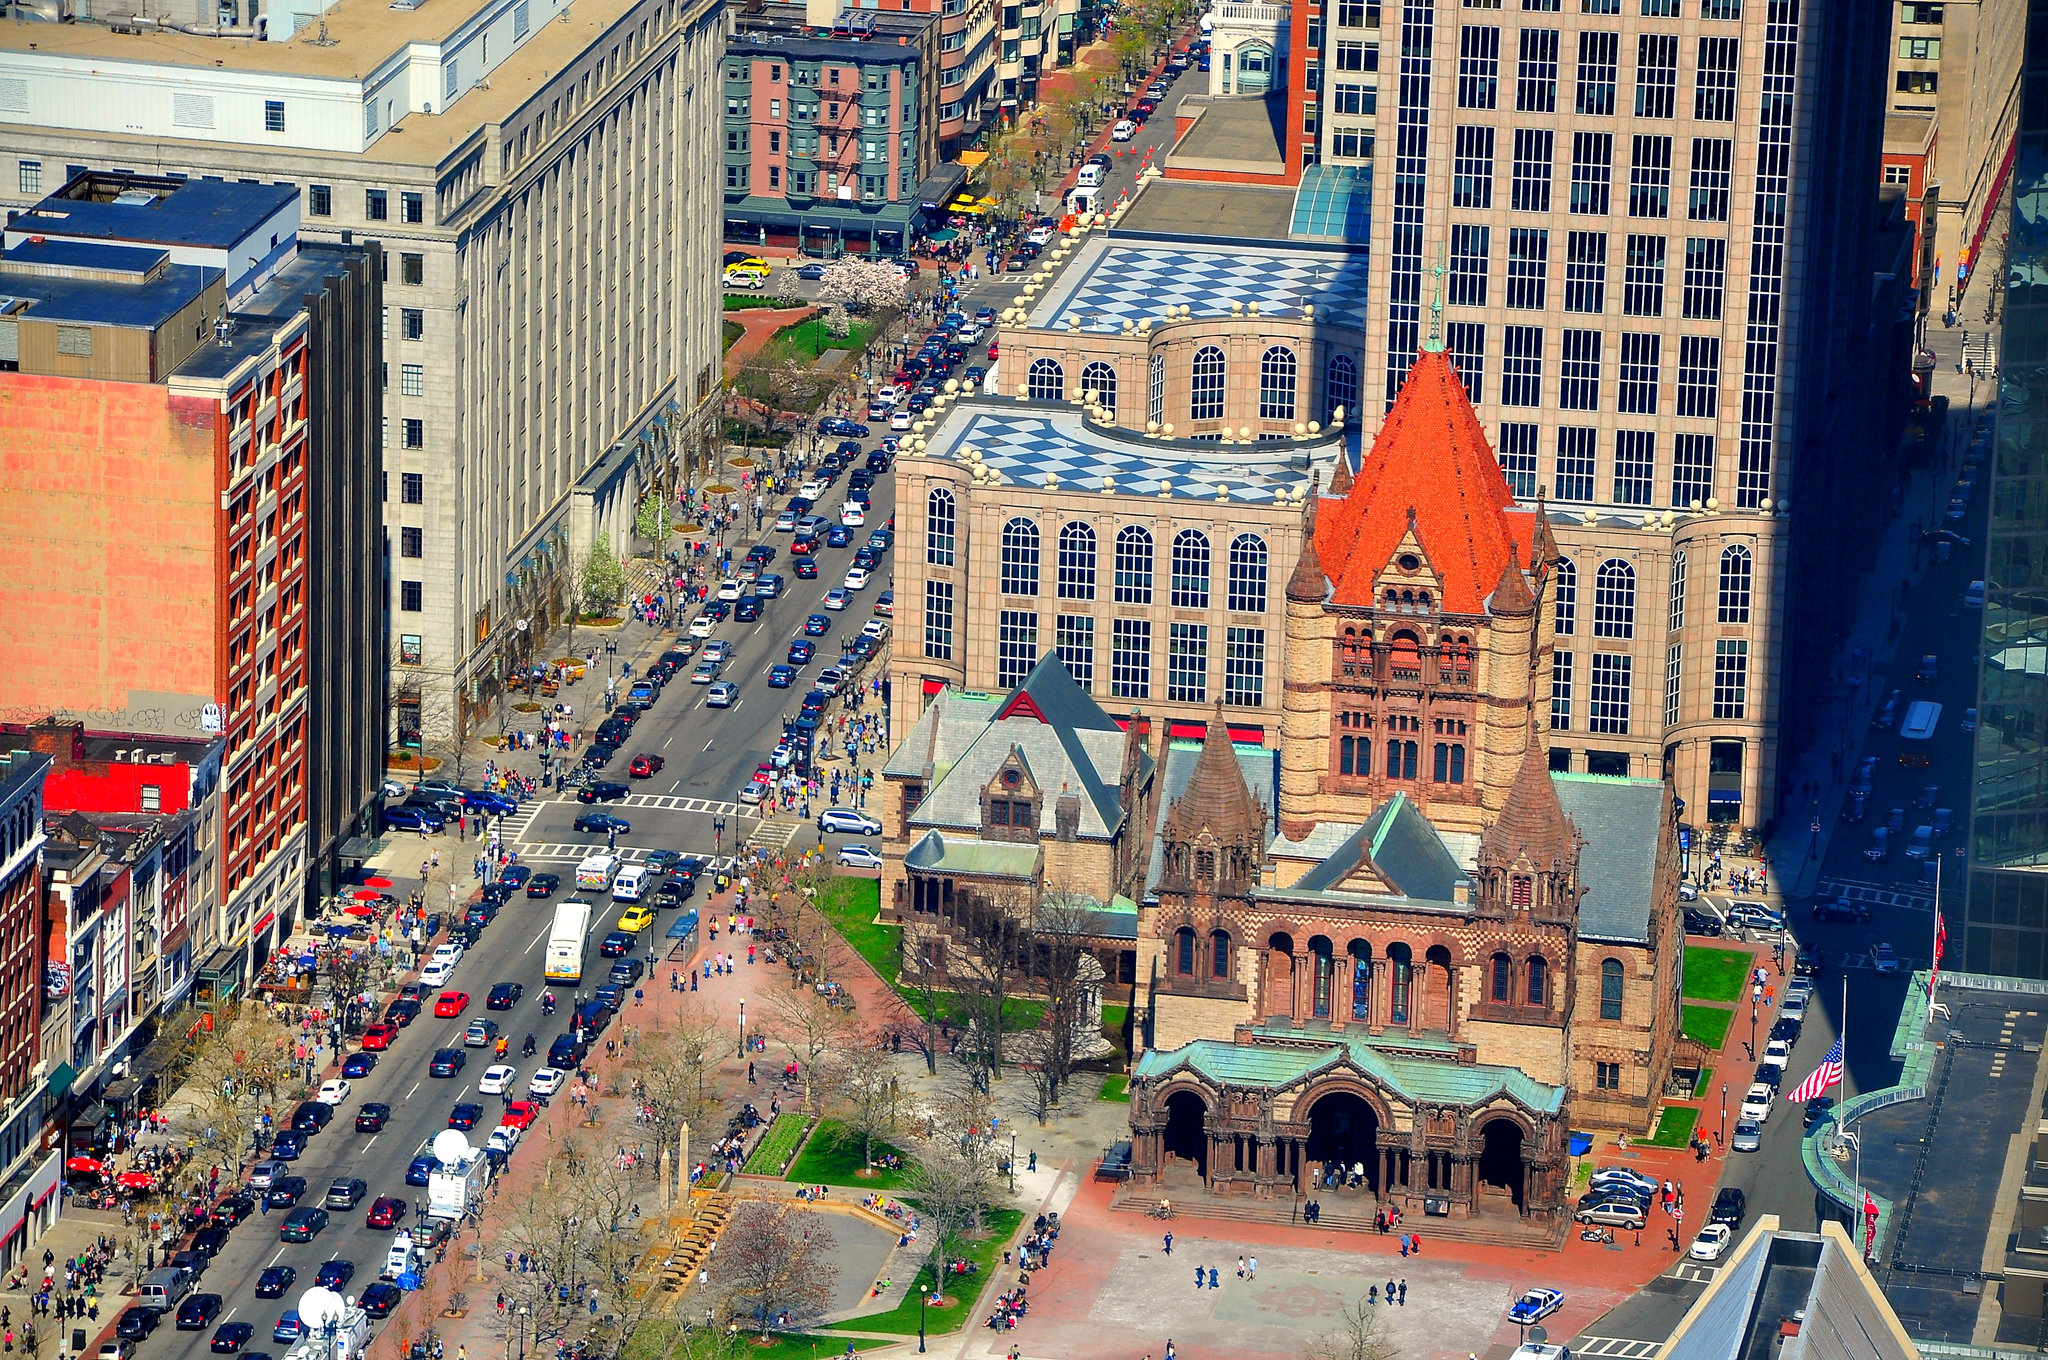 Copley Square Boston History, Facts, & Things To Do Nearby